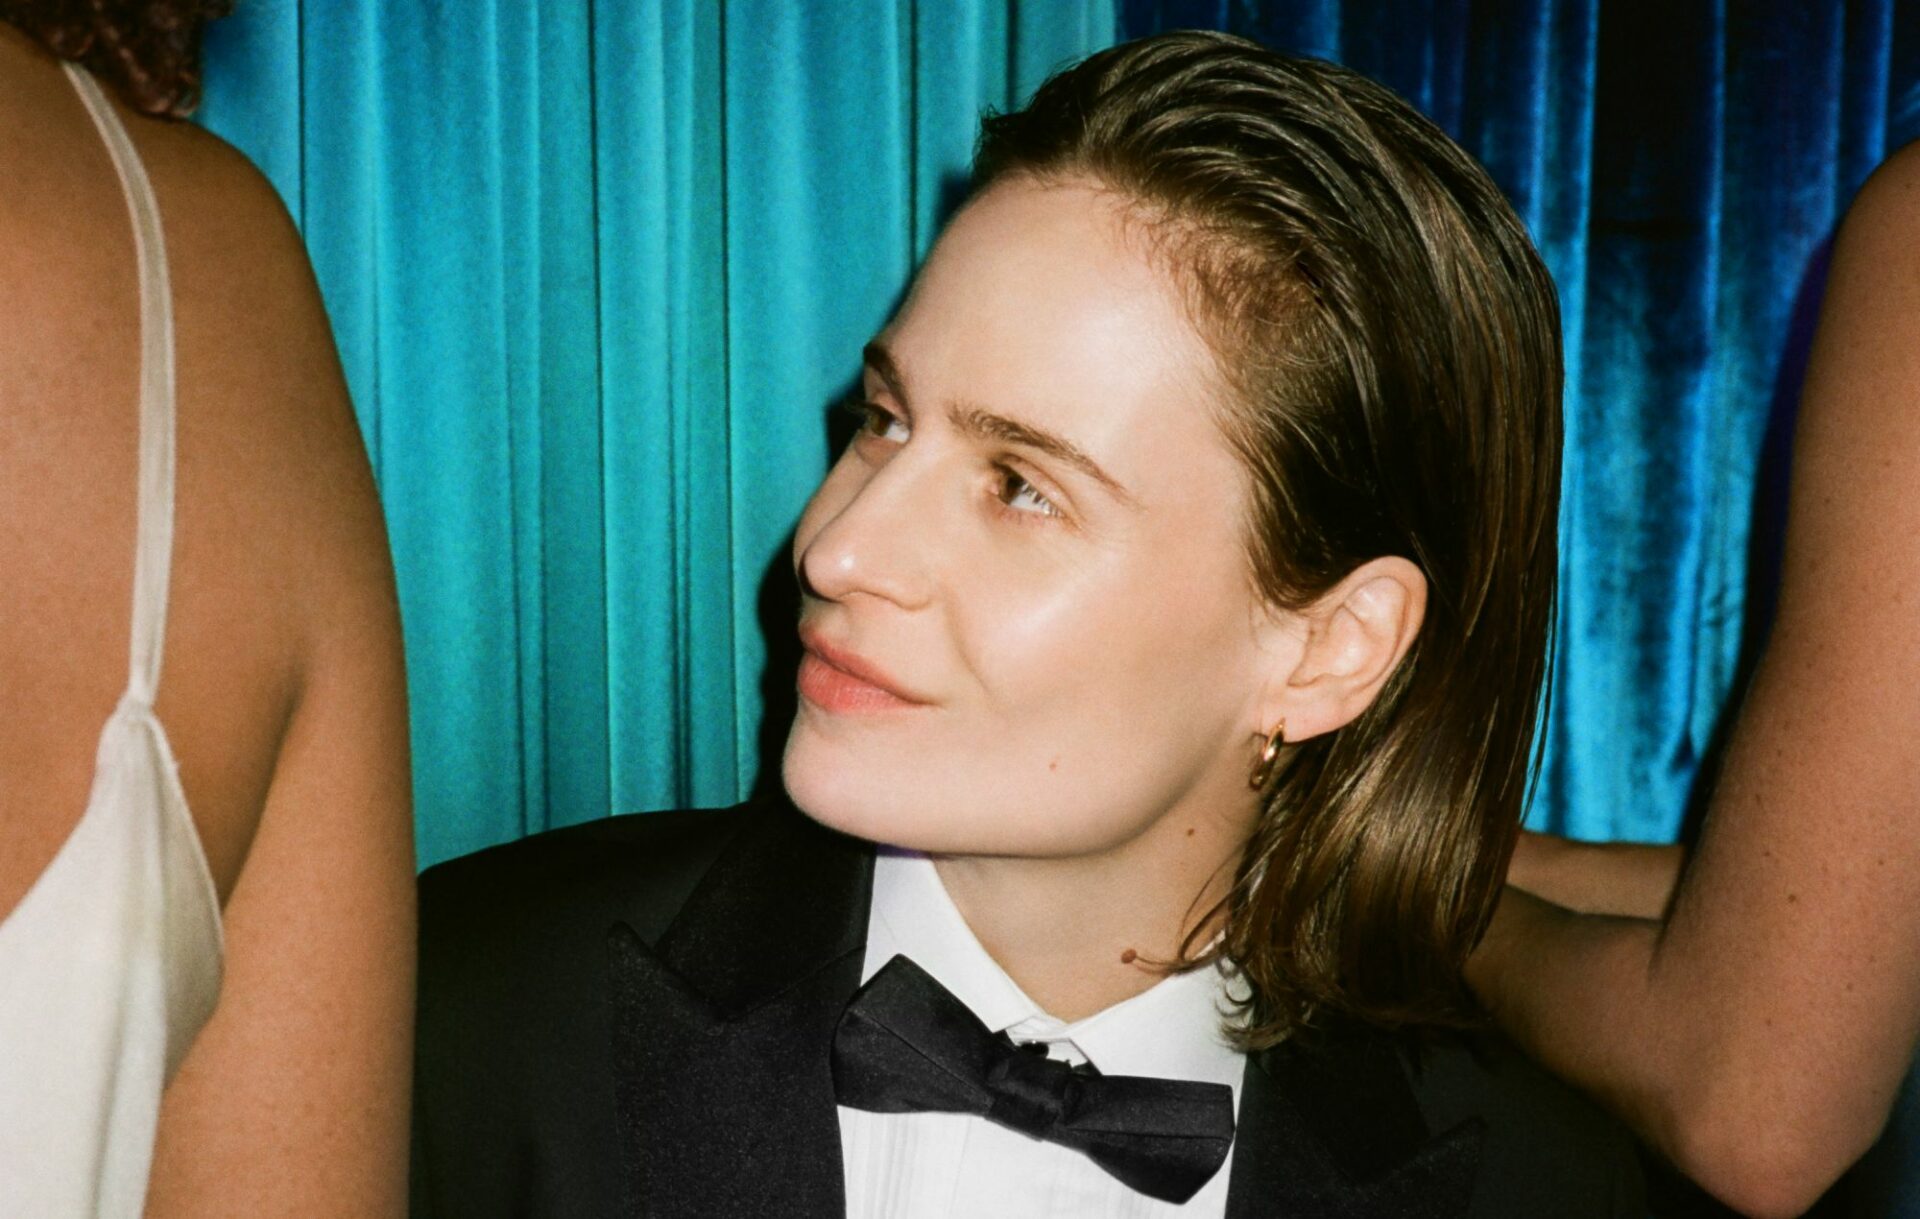 Christine and the Queens' Chris says he now identifies as male